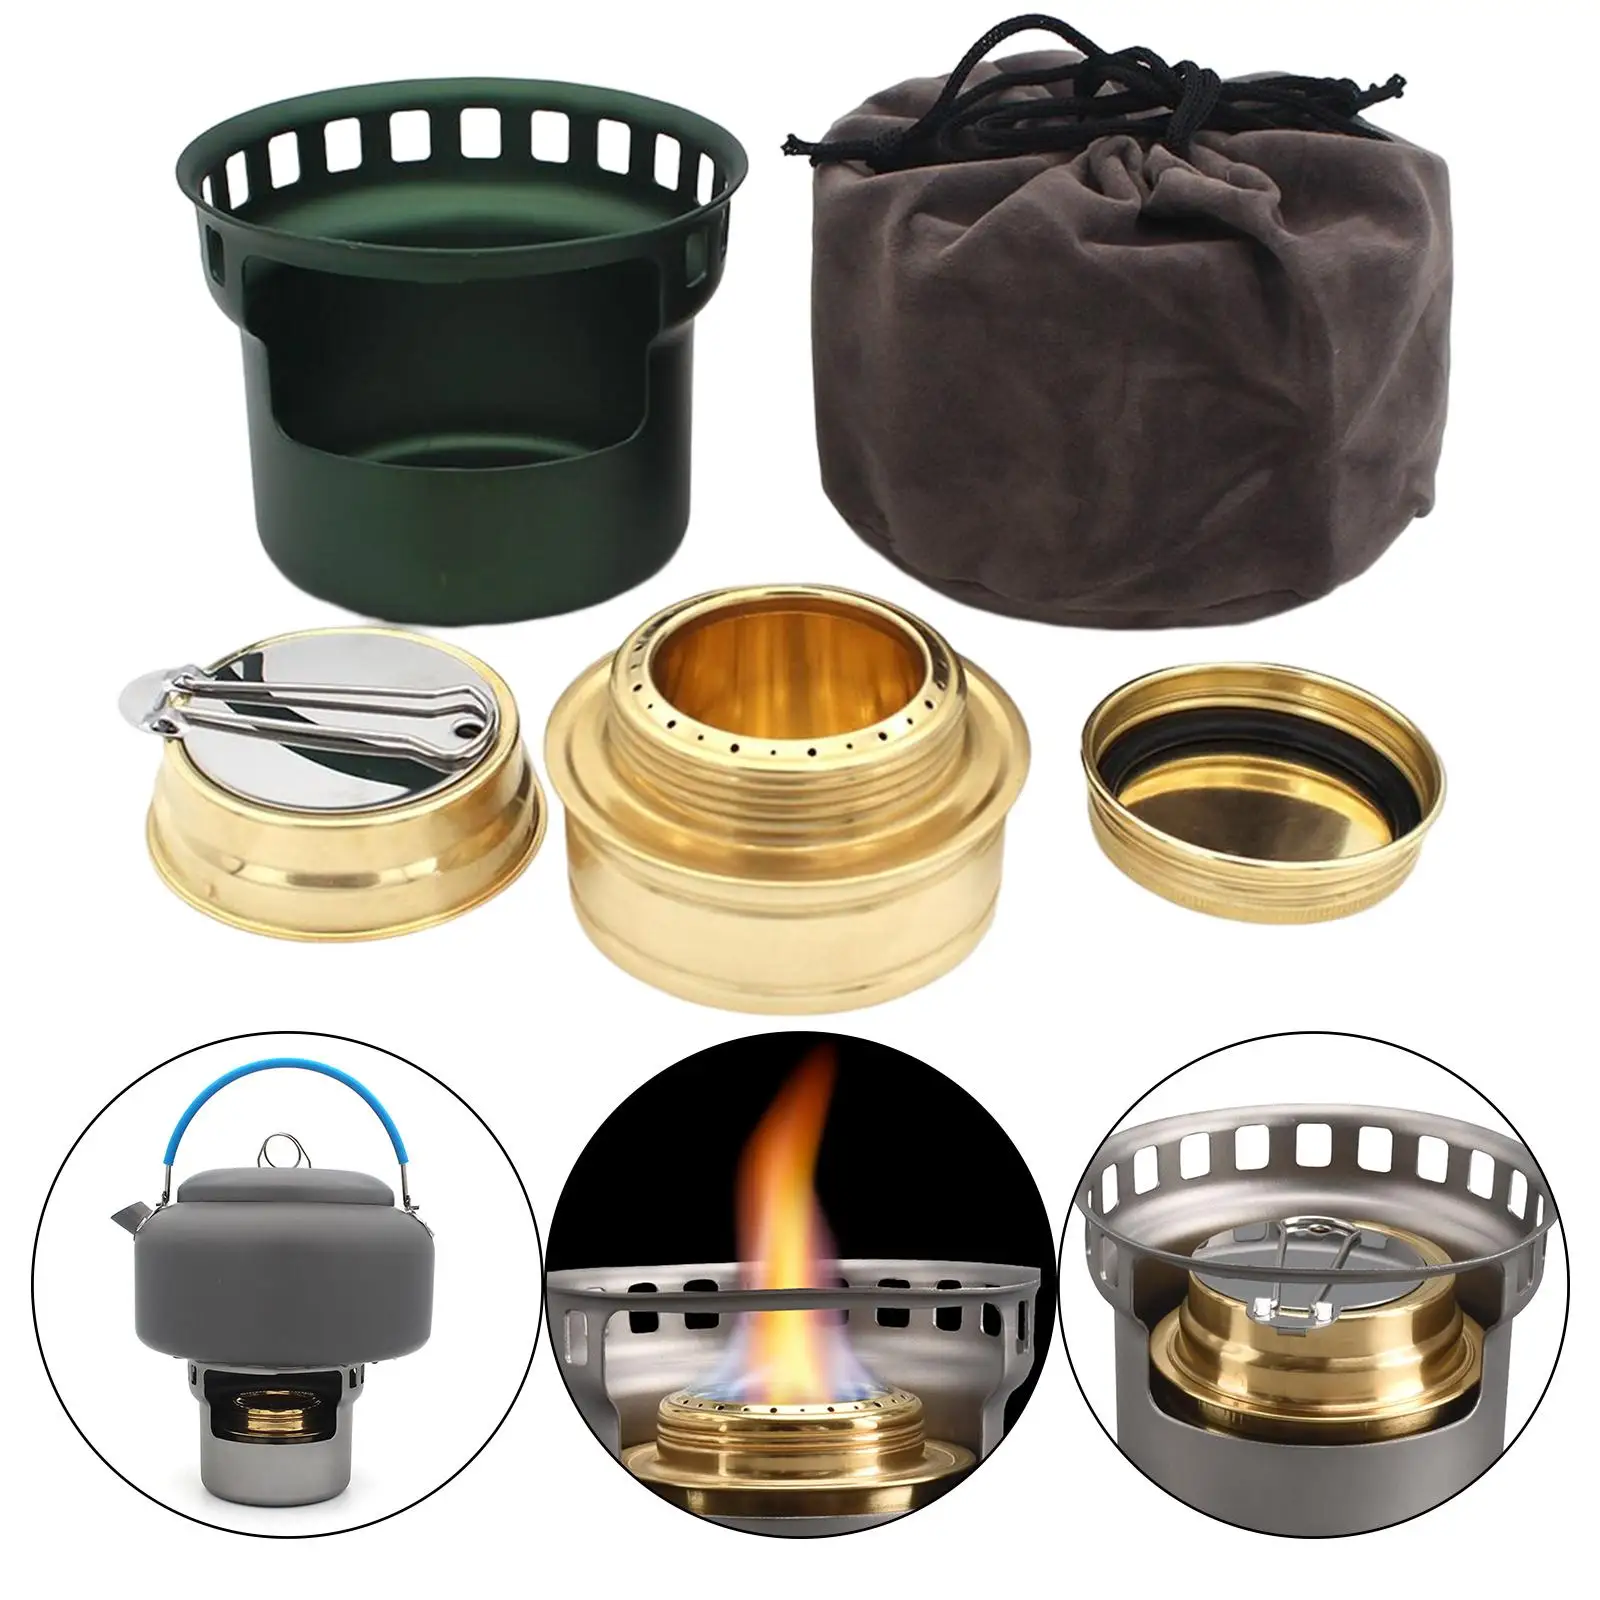 Spirit Stove Burner with Storage Bag Accessories Multifunctional for Fishing